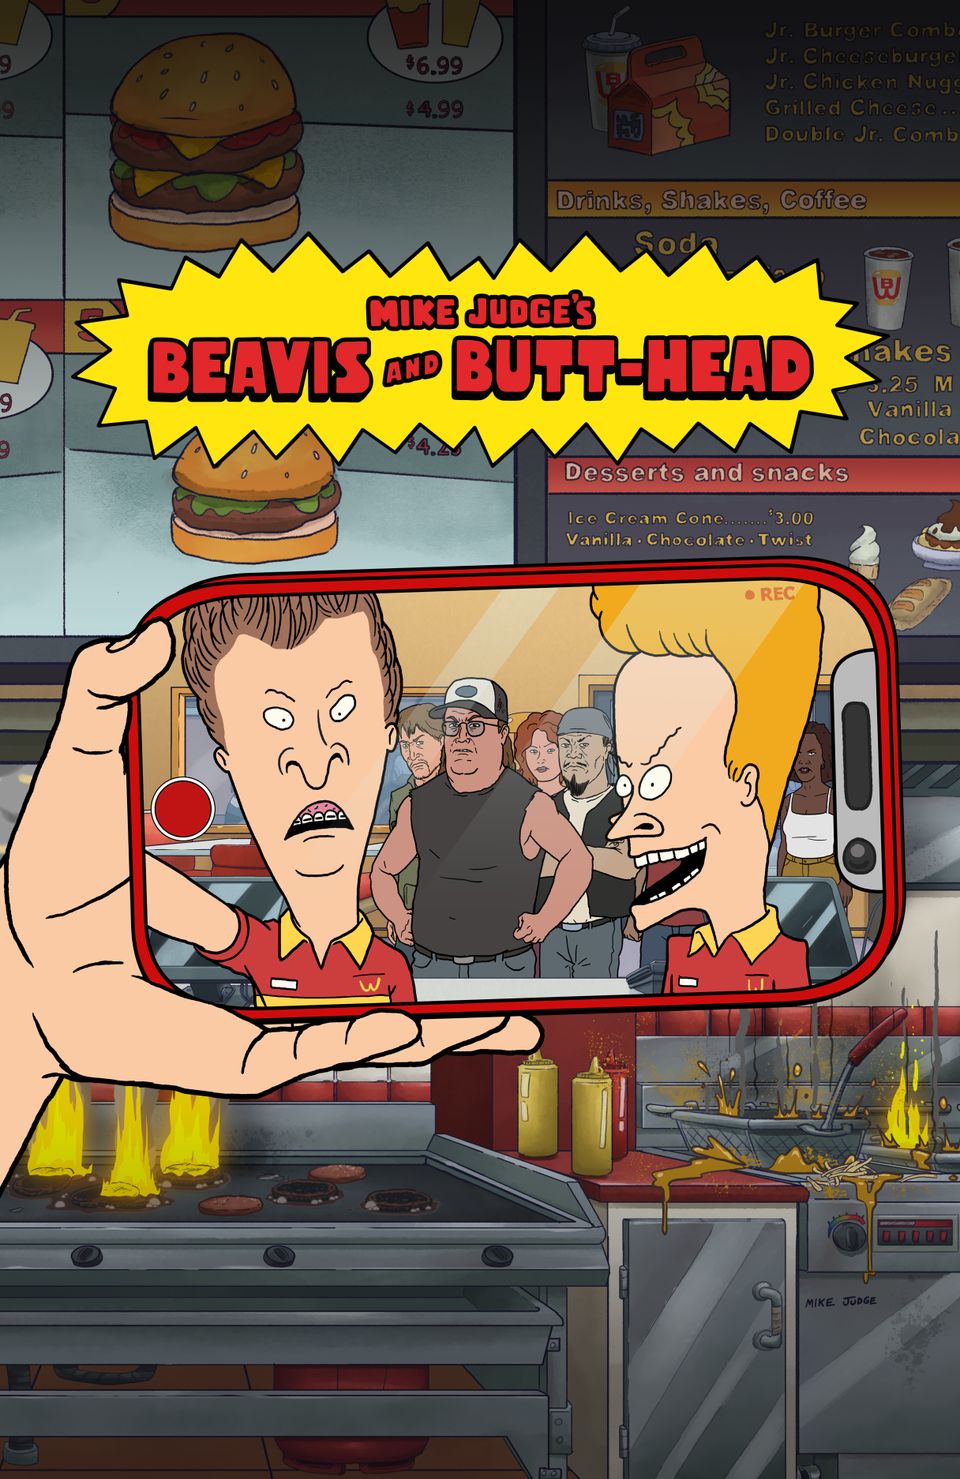 “Beavis & Butt-Head” is back – watch the new season for free on Pluto TV in Norway